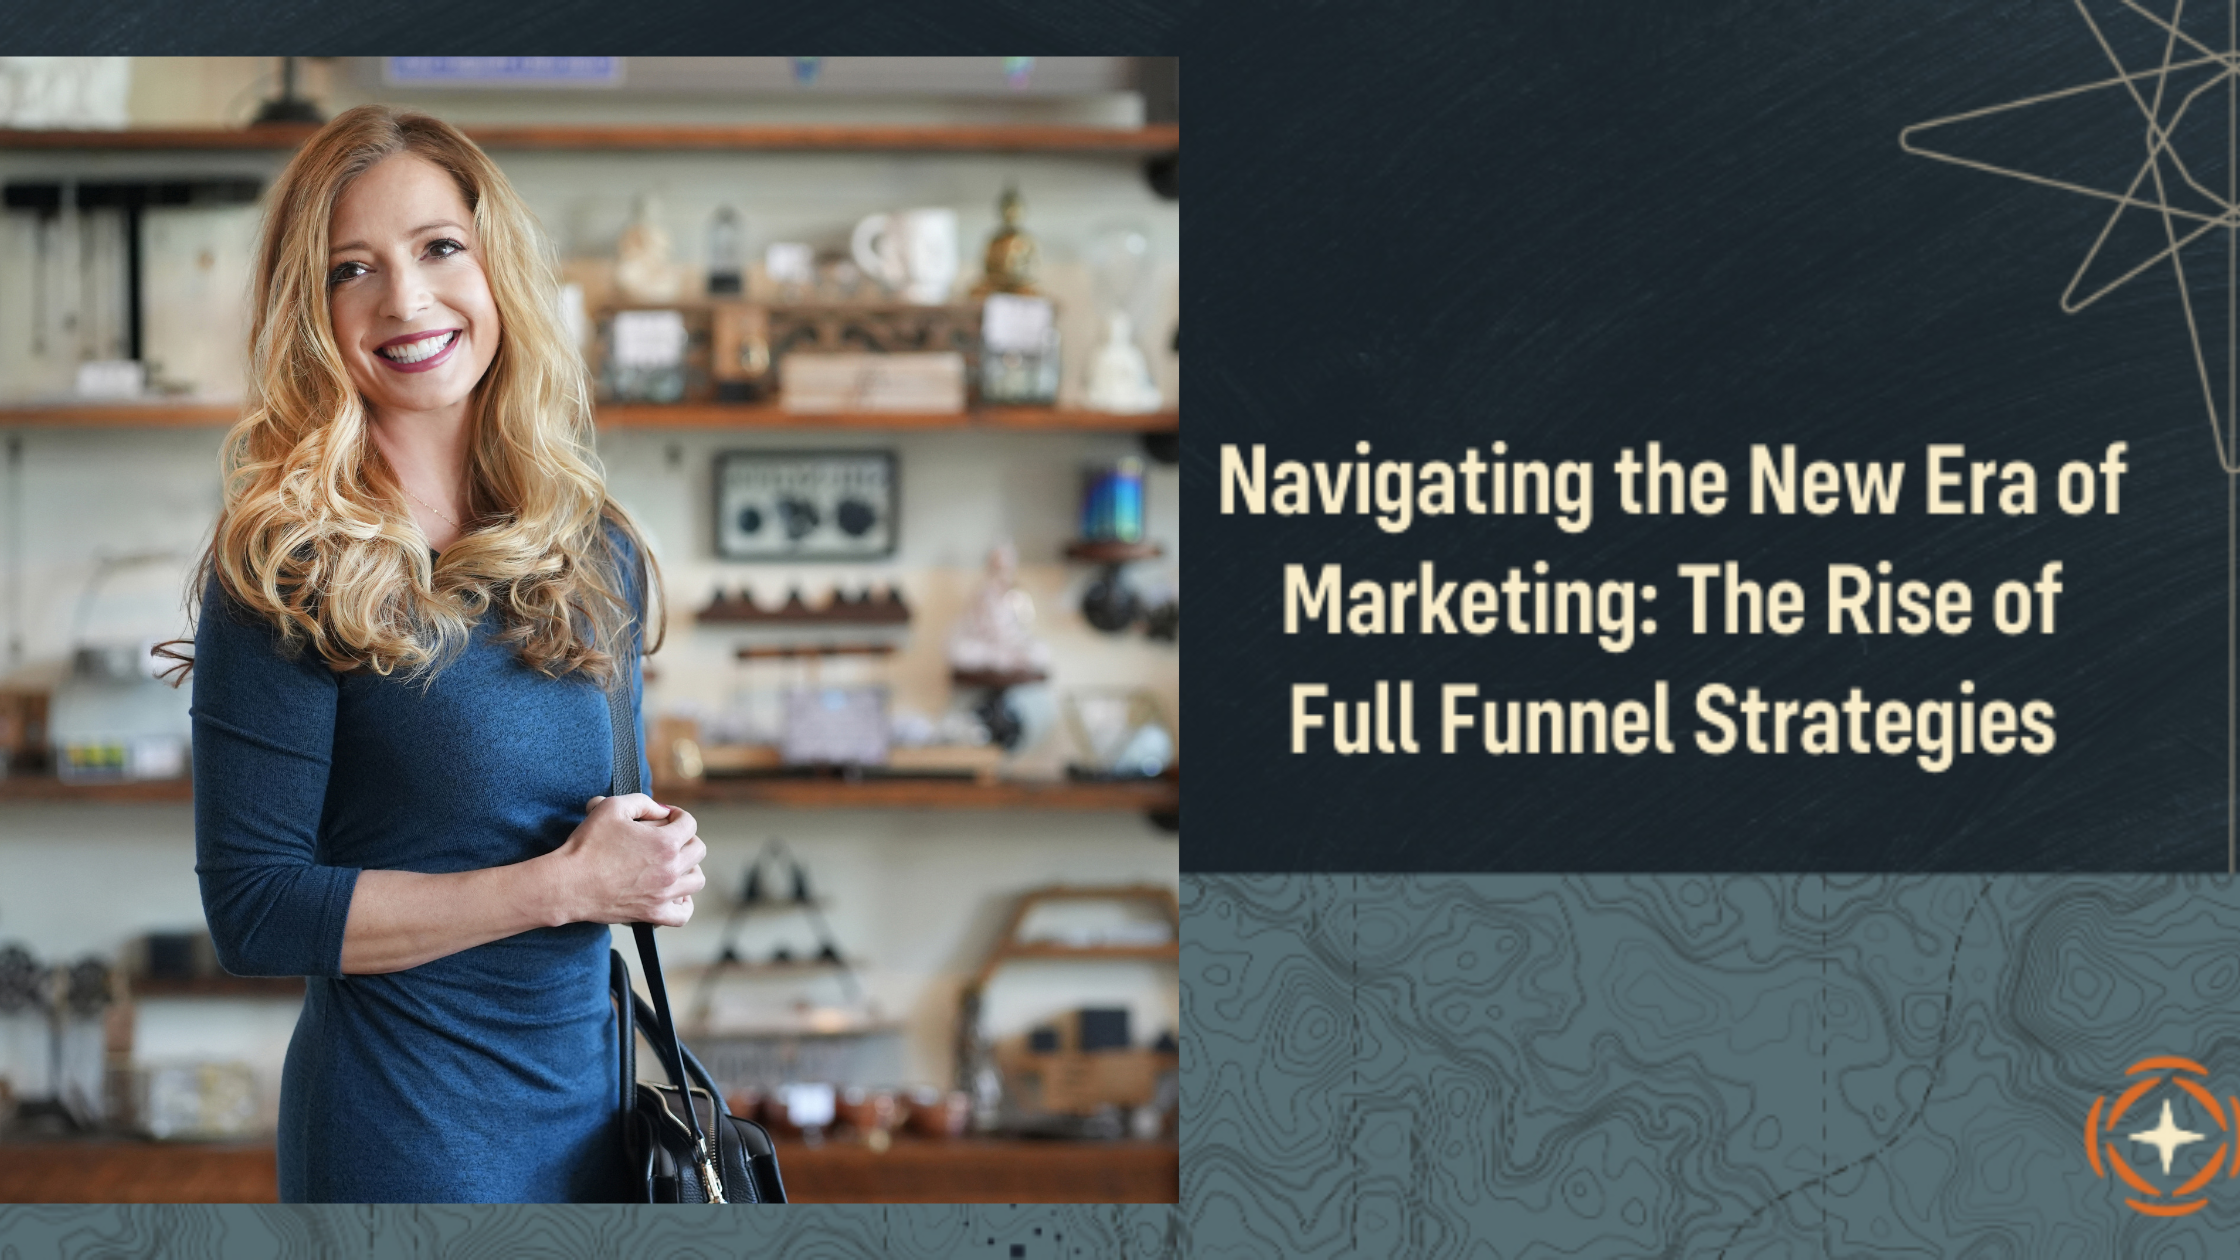 Navigating the New Era of Marketing: The Rise of Full Funnel Strategies